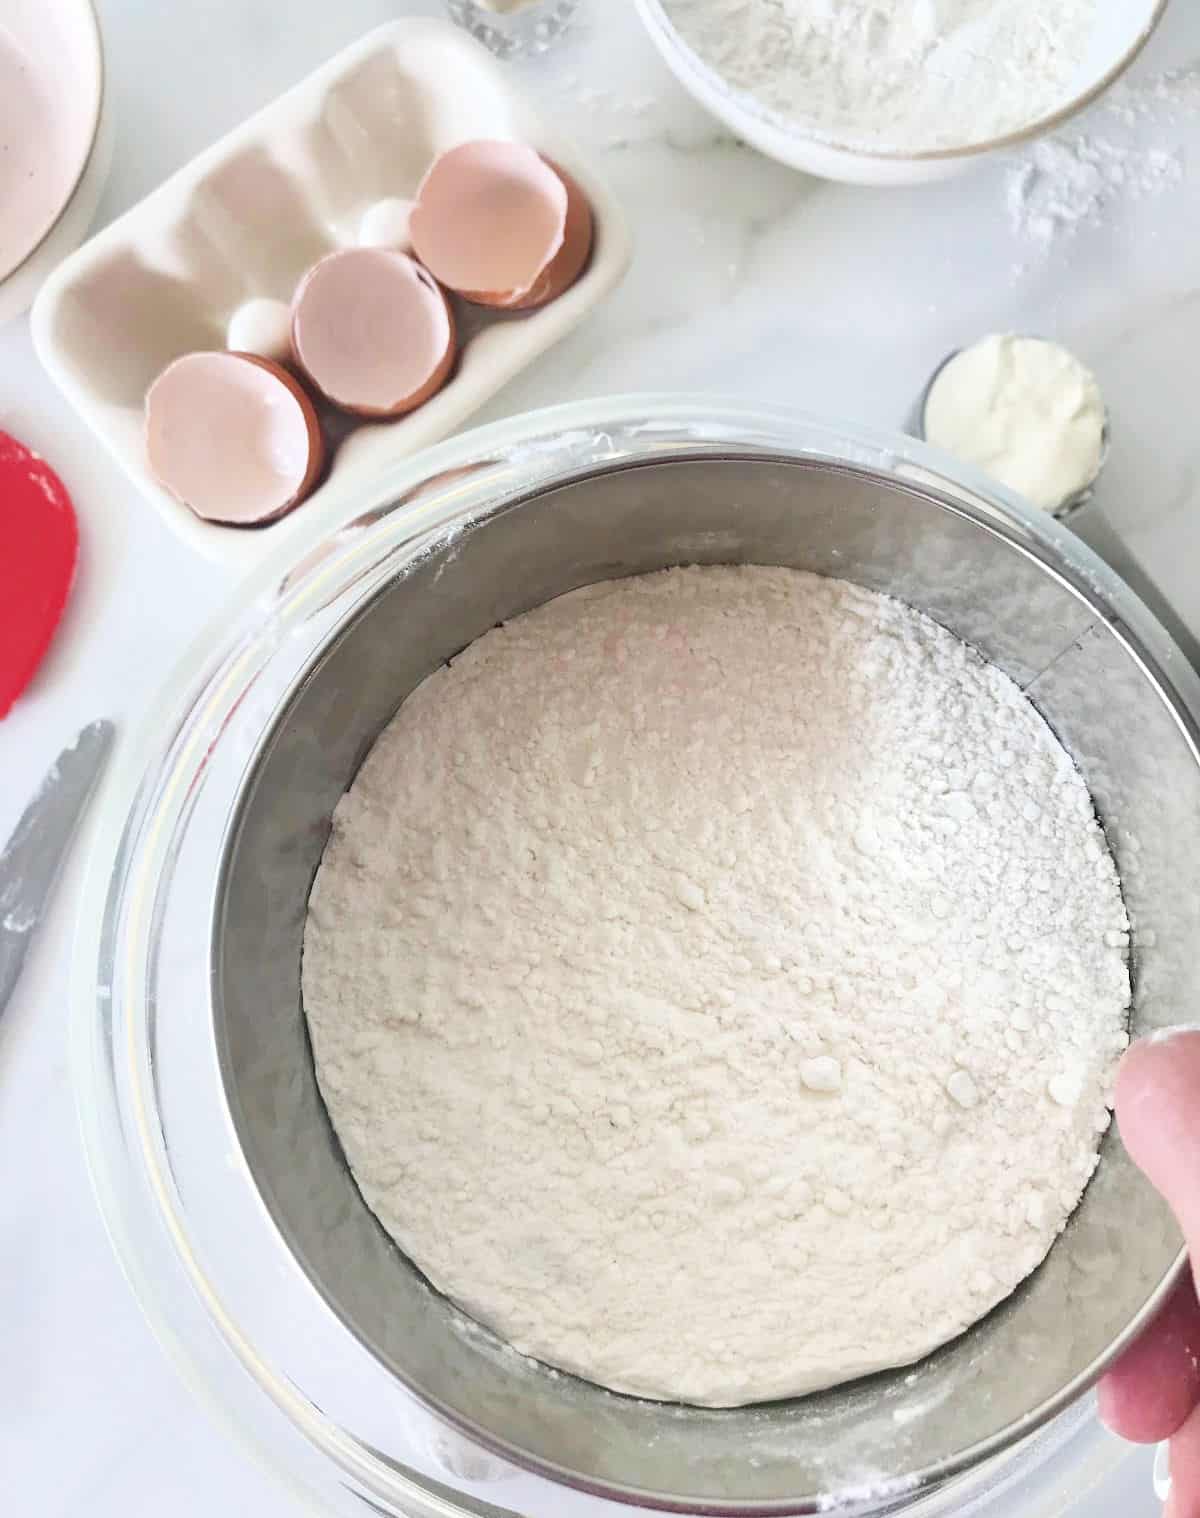 White marble surface with eggs, bowls, hand sifting flour over bowl